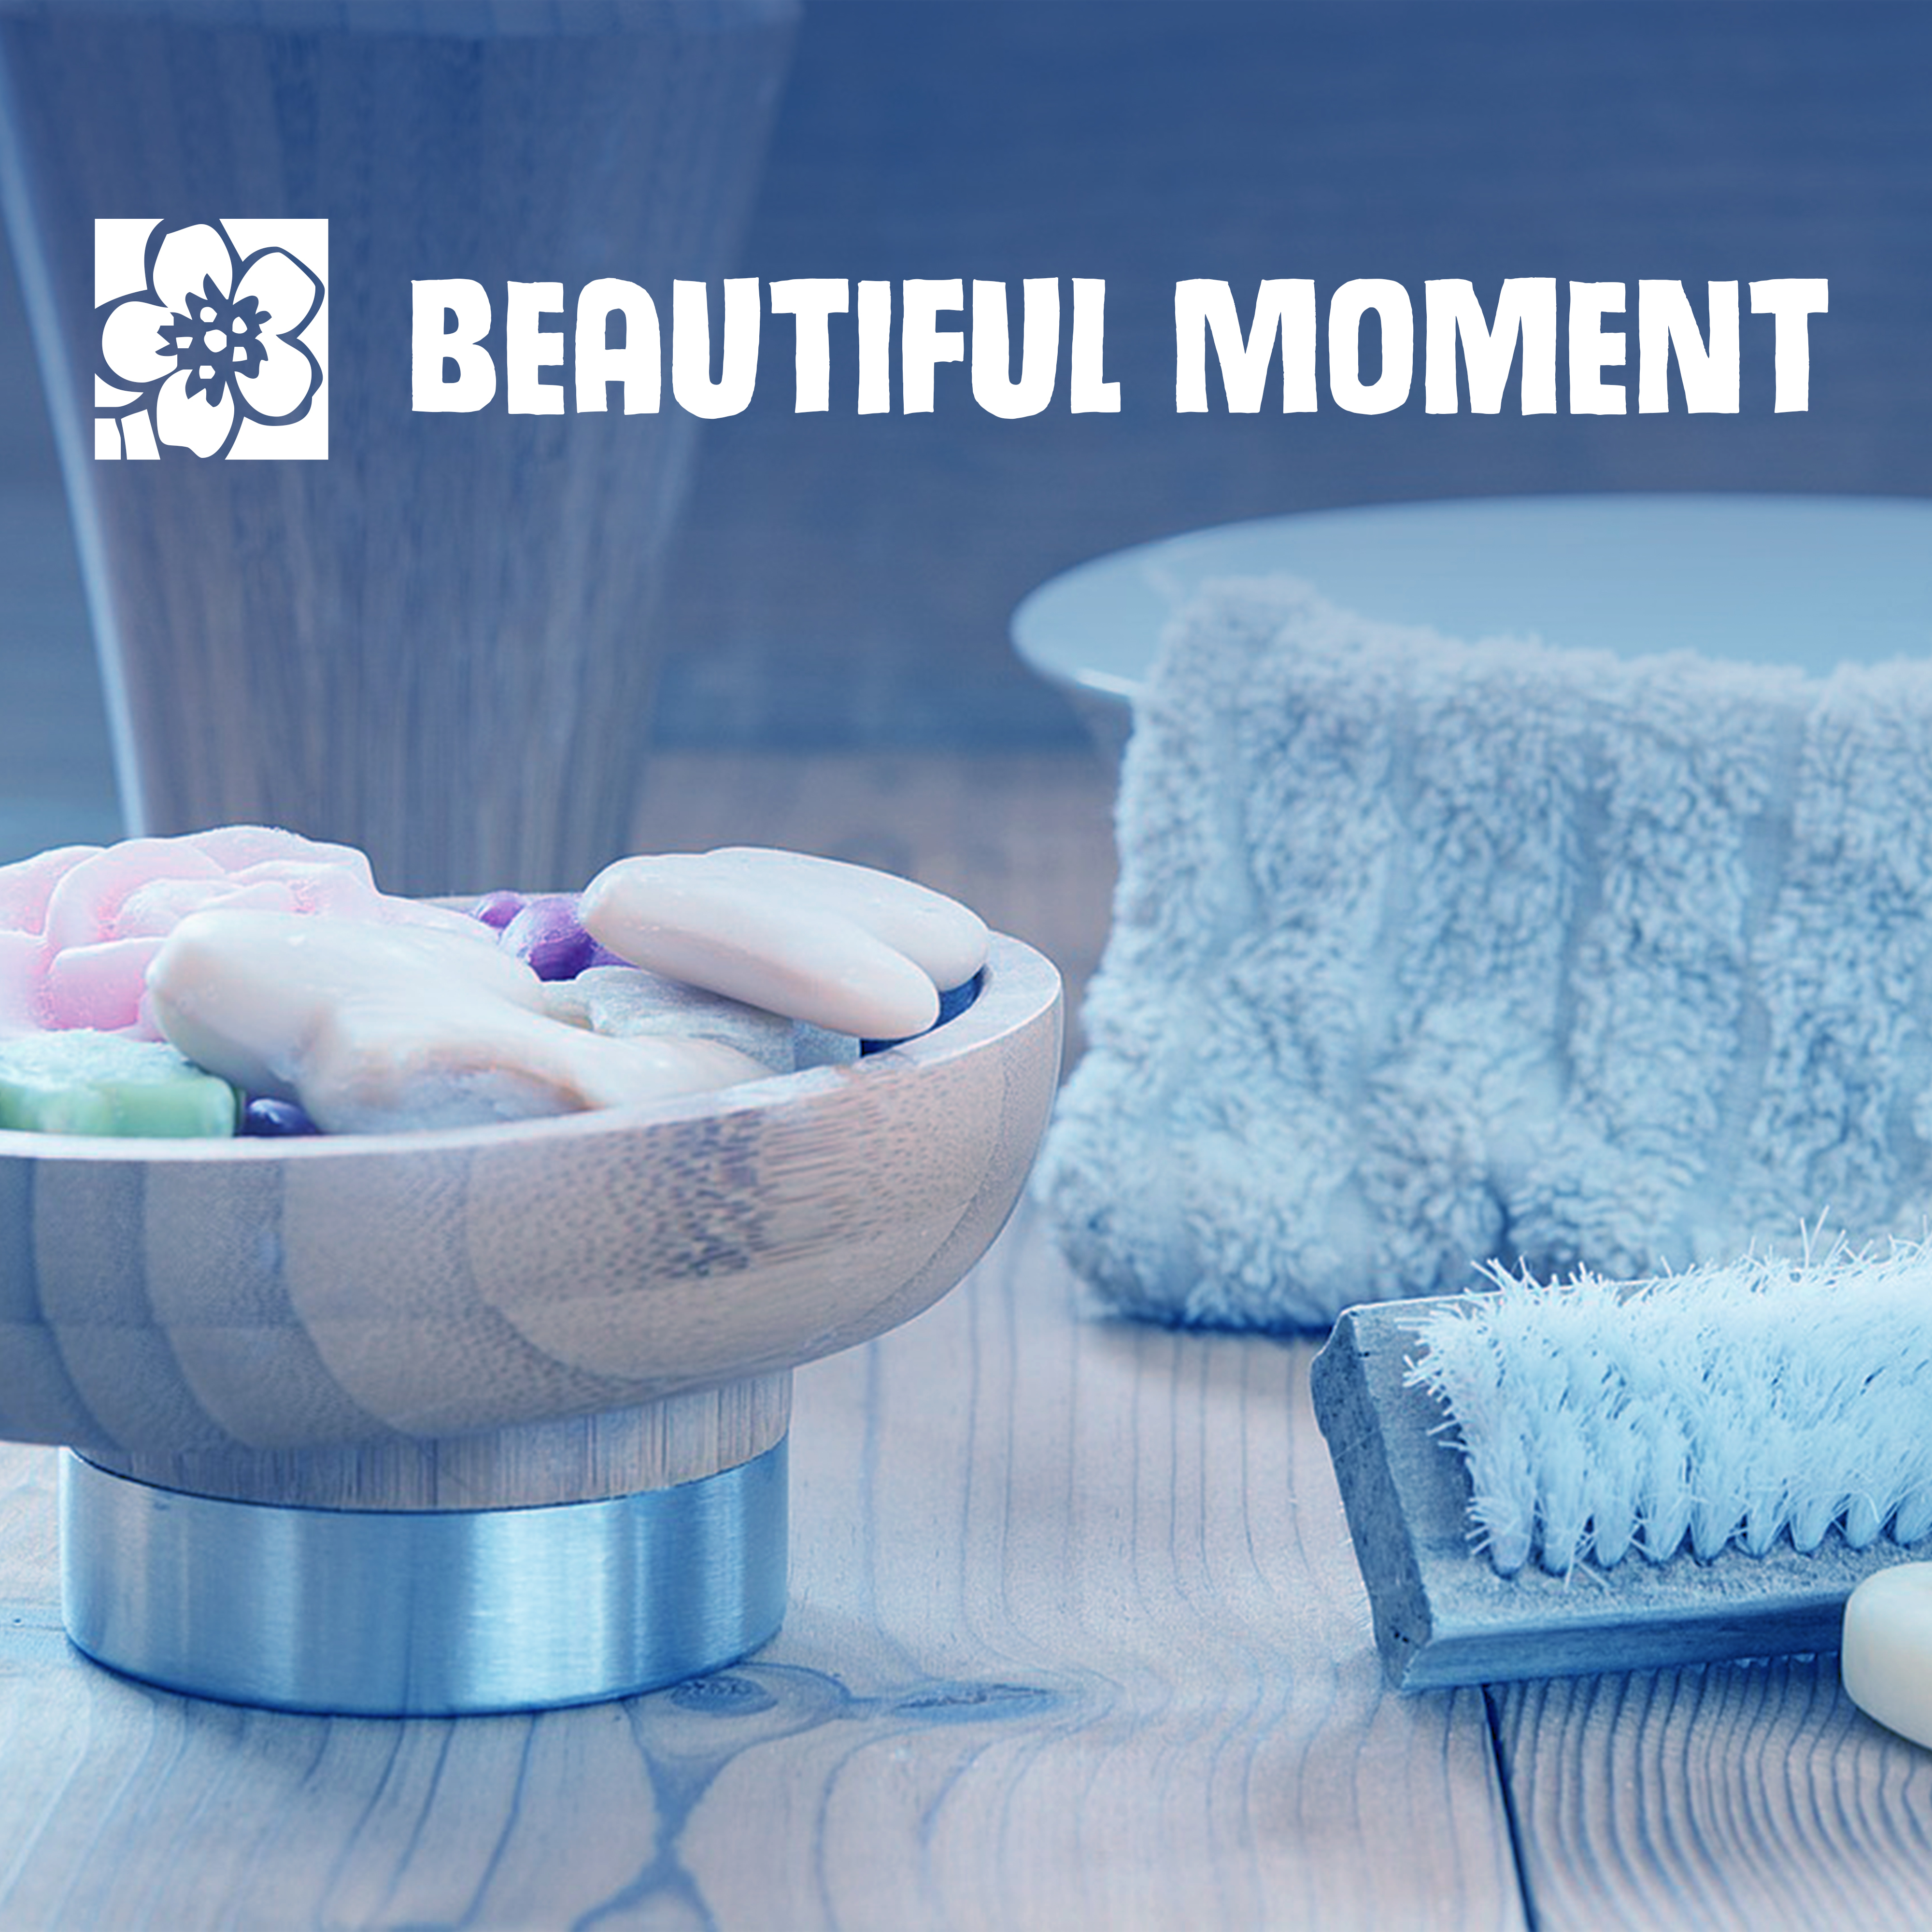 Beautiful Moment – Relaxation Music for Spa, Gentle Waves, Relaxed Mind, Stress Relief, Calm Soul, Chill in Wellness